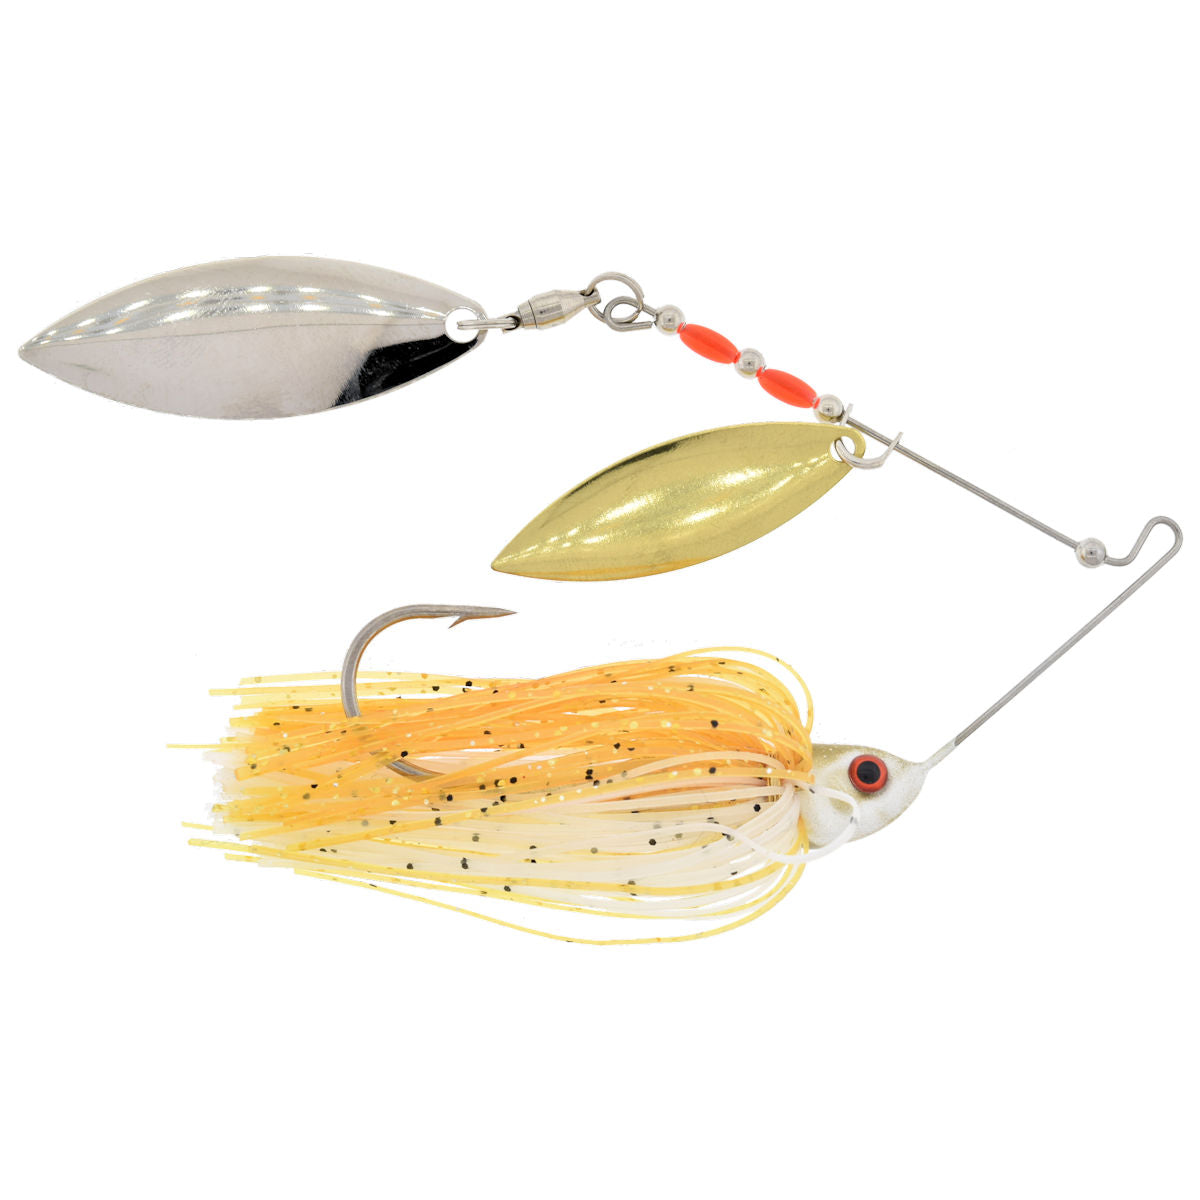 Glimmer Series Double Willow Spinnerbait_Golden Shiner Gold/Silver